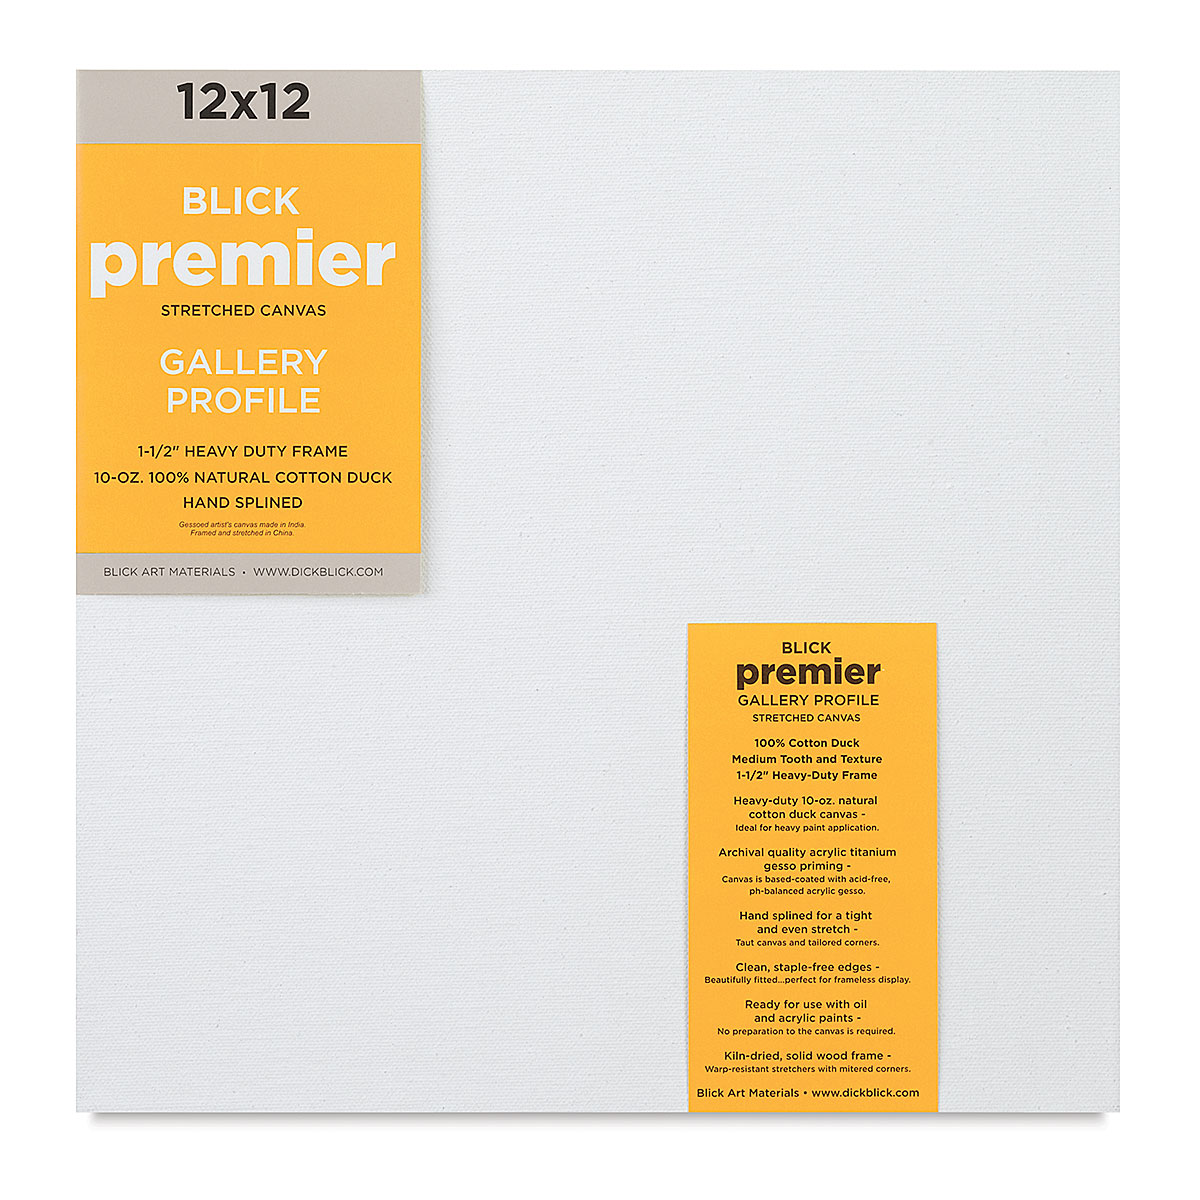 Stretched Canvas 16x20 10 Pack 10 oz. Triple Primed, Professional Artist  White Canvas, 100% Cotton, Art Supplies for Crafts, Gesso-Primed for Oil